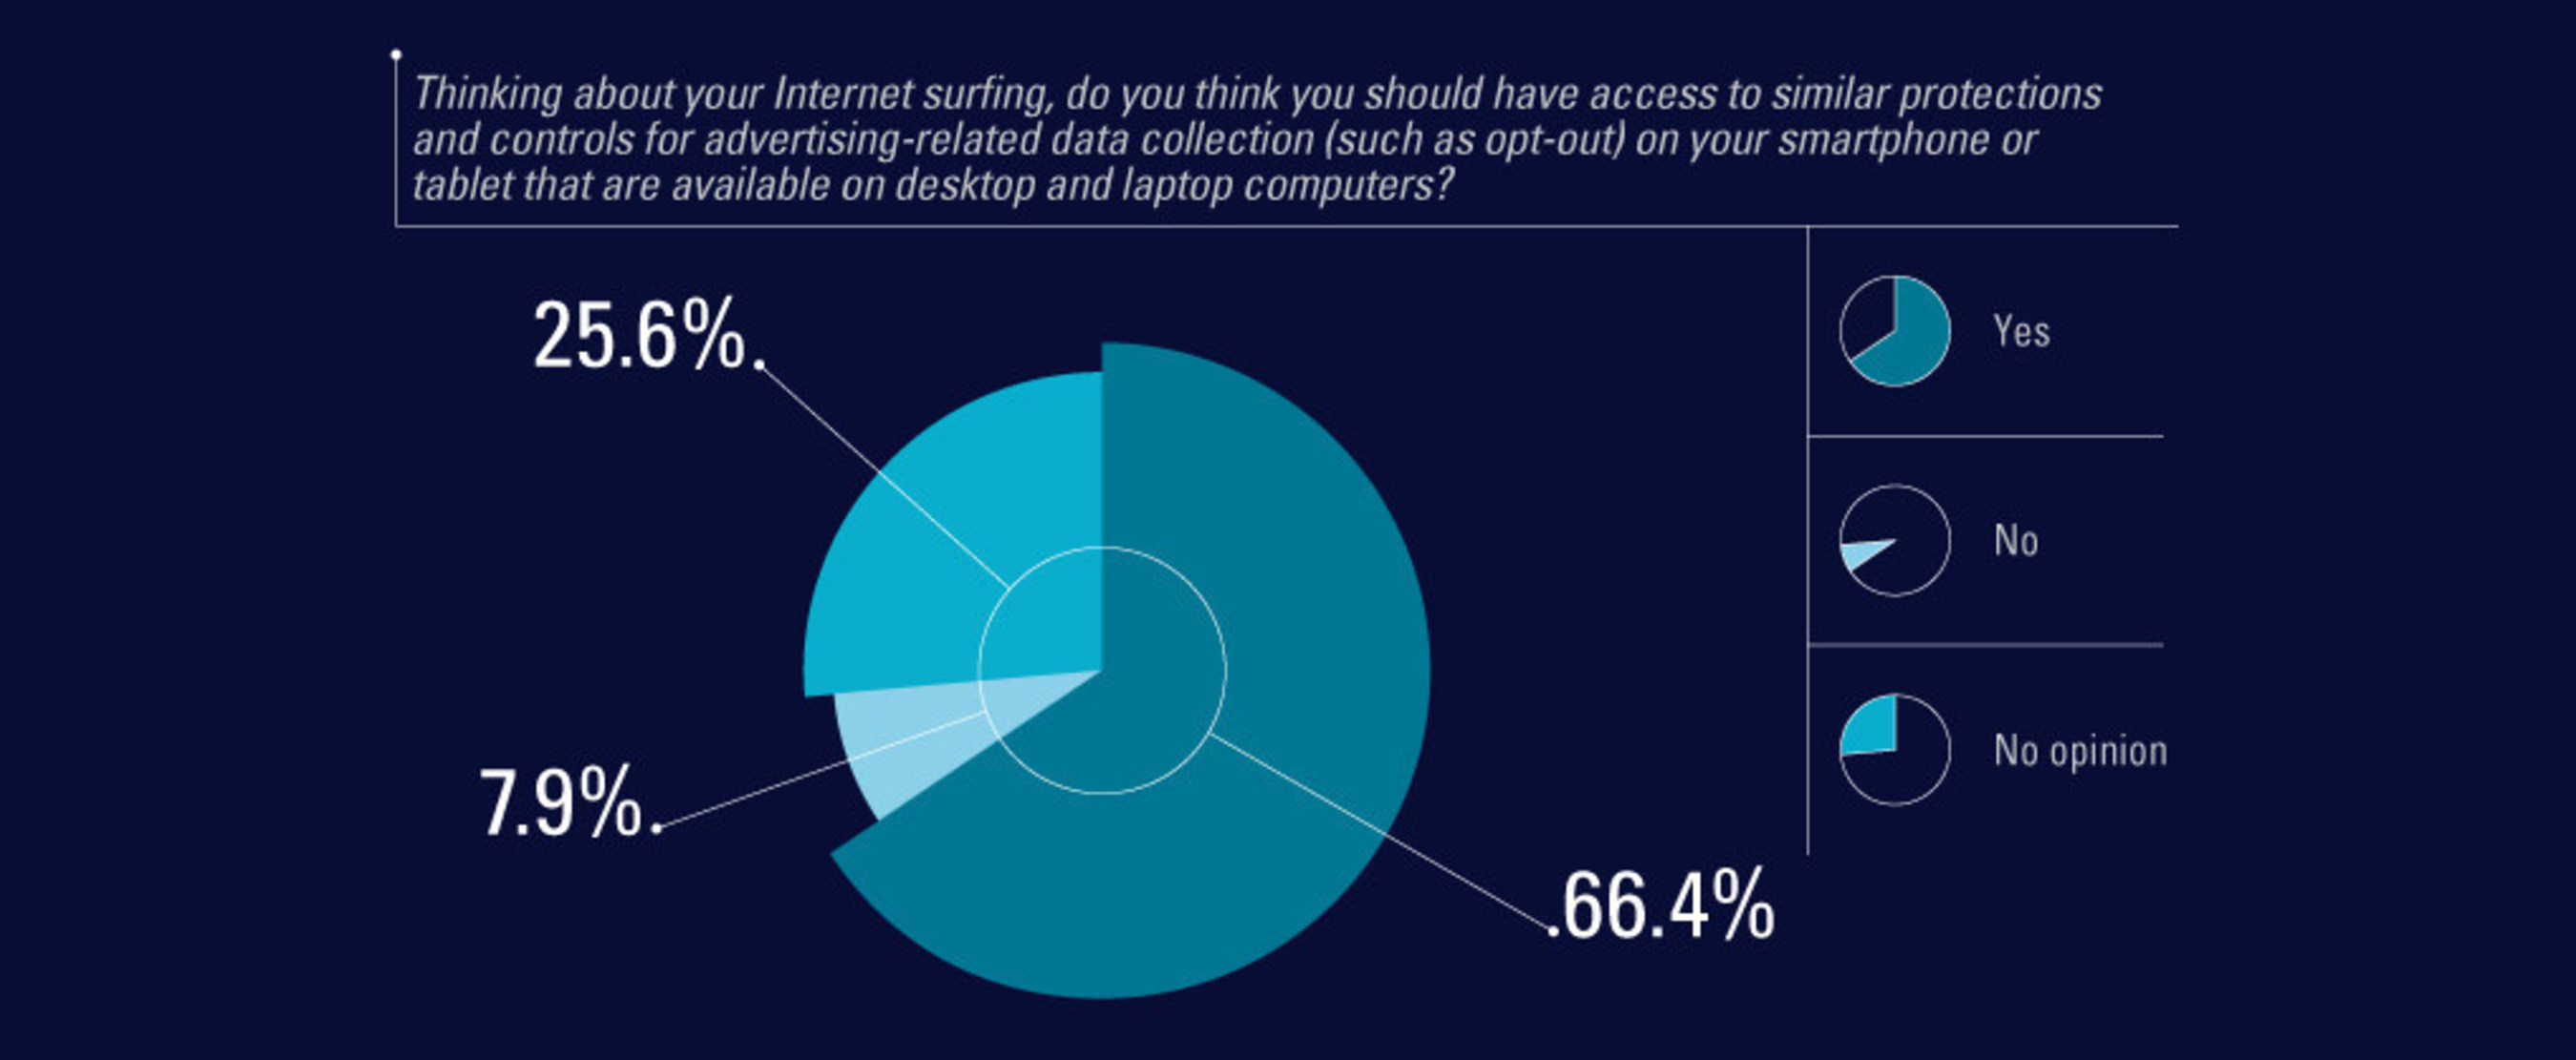 Zogby Analytics poll finds that Americans want the same data-collection protections that are available on desktop and laptop computers on their mobile devices.